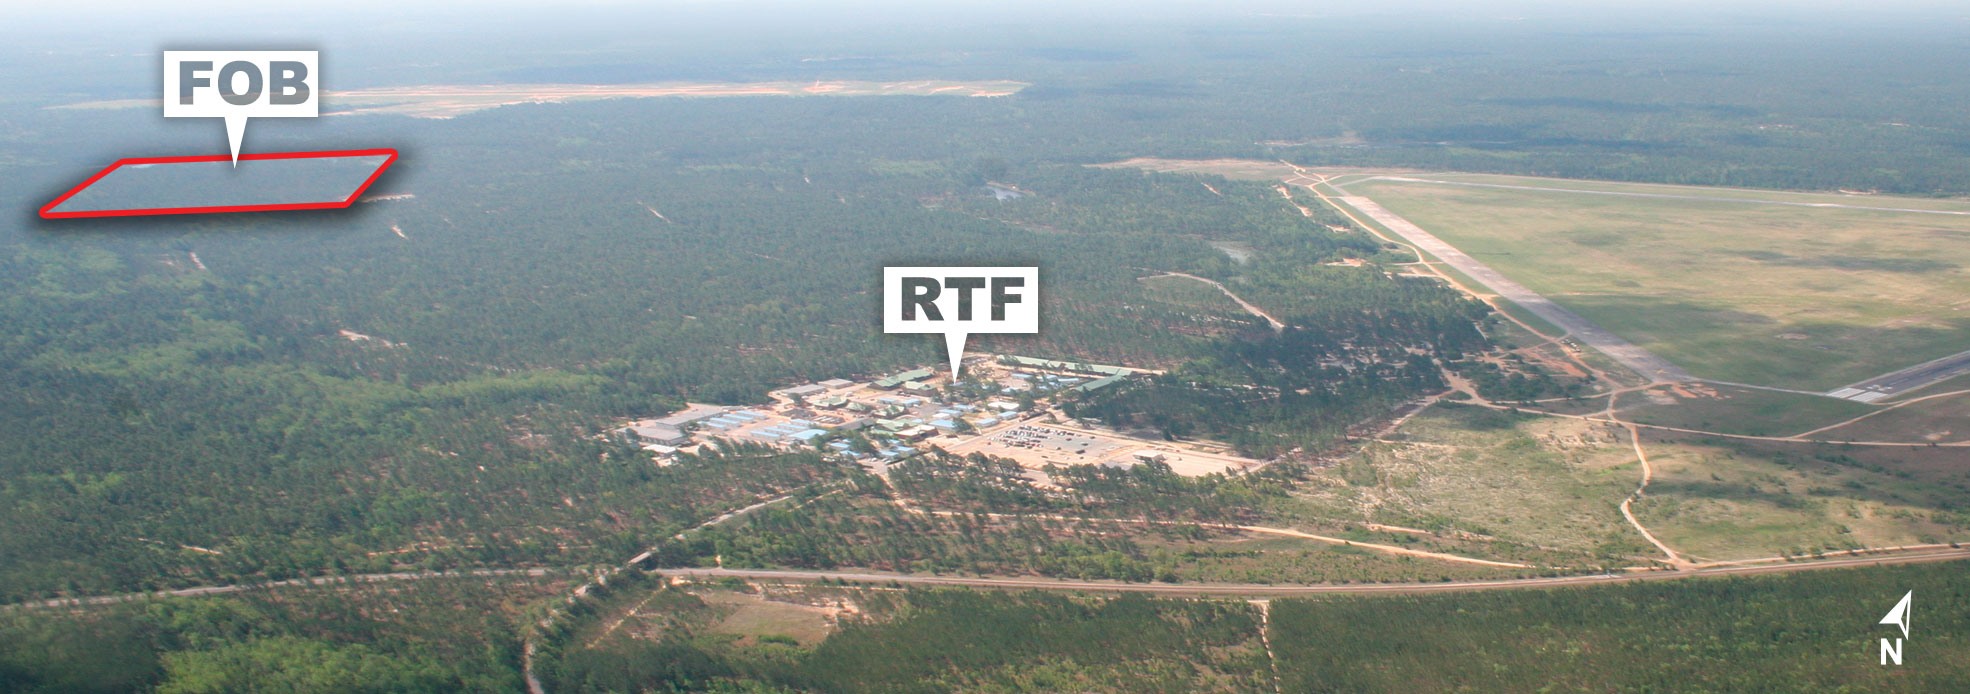 Aerial view of Camp Mackall taken in May 2007. In the center of the photo is the Rowe Training Facility (RTF). The FOB Freedom area is outlined in red.